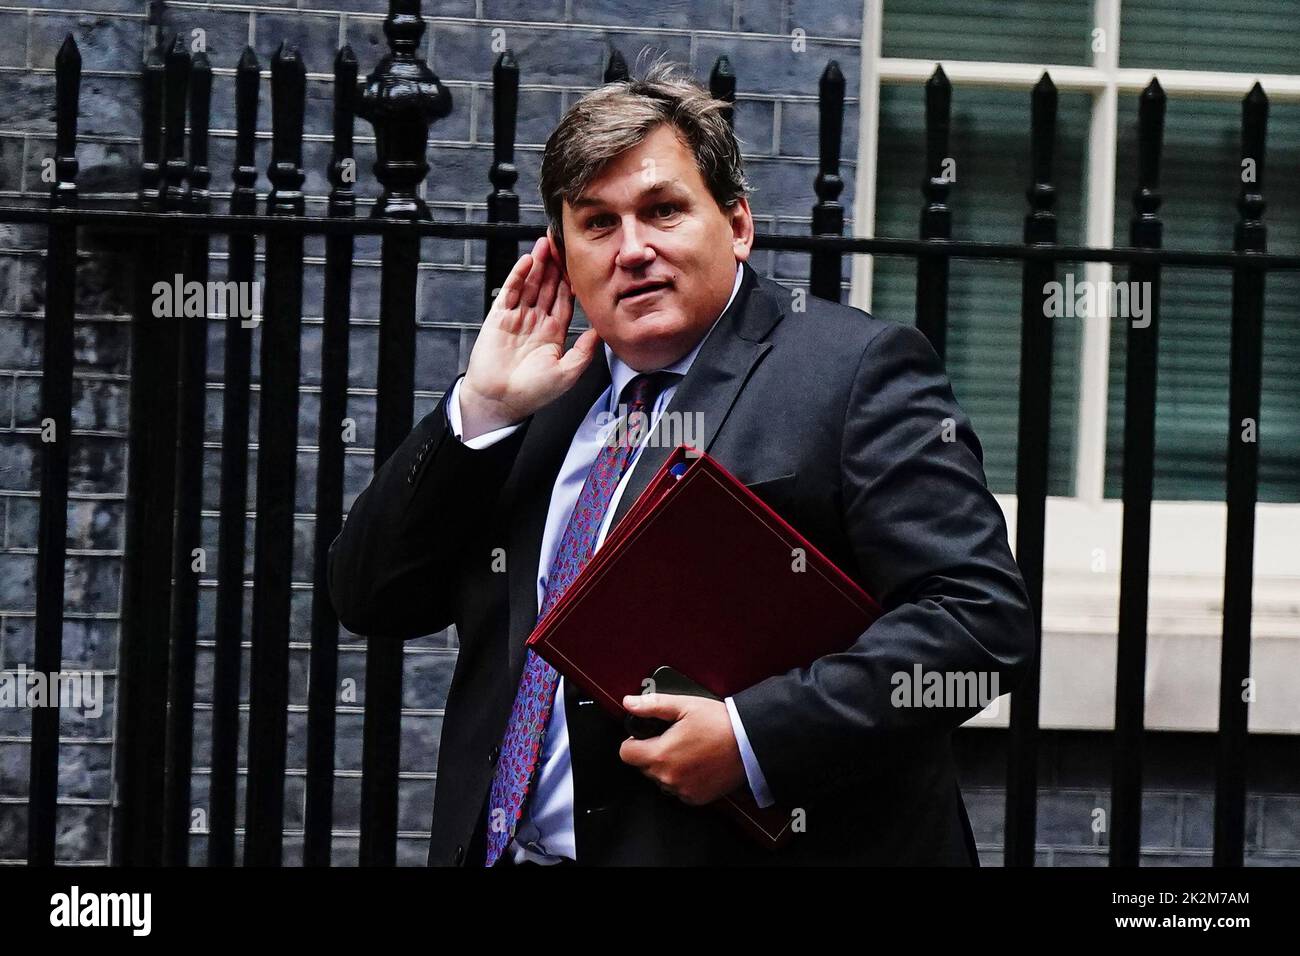 Education Secretary Kit Malthouse arrives for a cabinet meeting at 10 Downing Street, London, ahead of a mini-budget announcement by Chancellor of the Exchequer Kwasi Kwarteng. Picture date: Friday September 23, 2022. Stock Photo